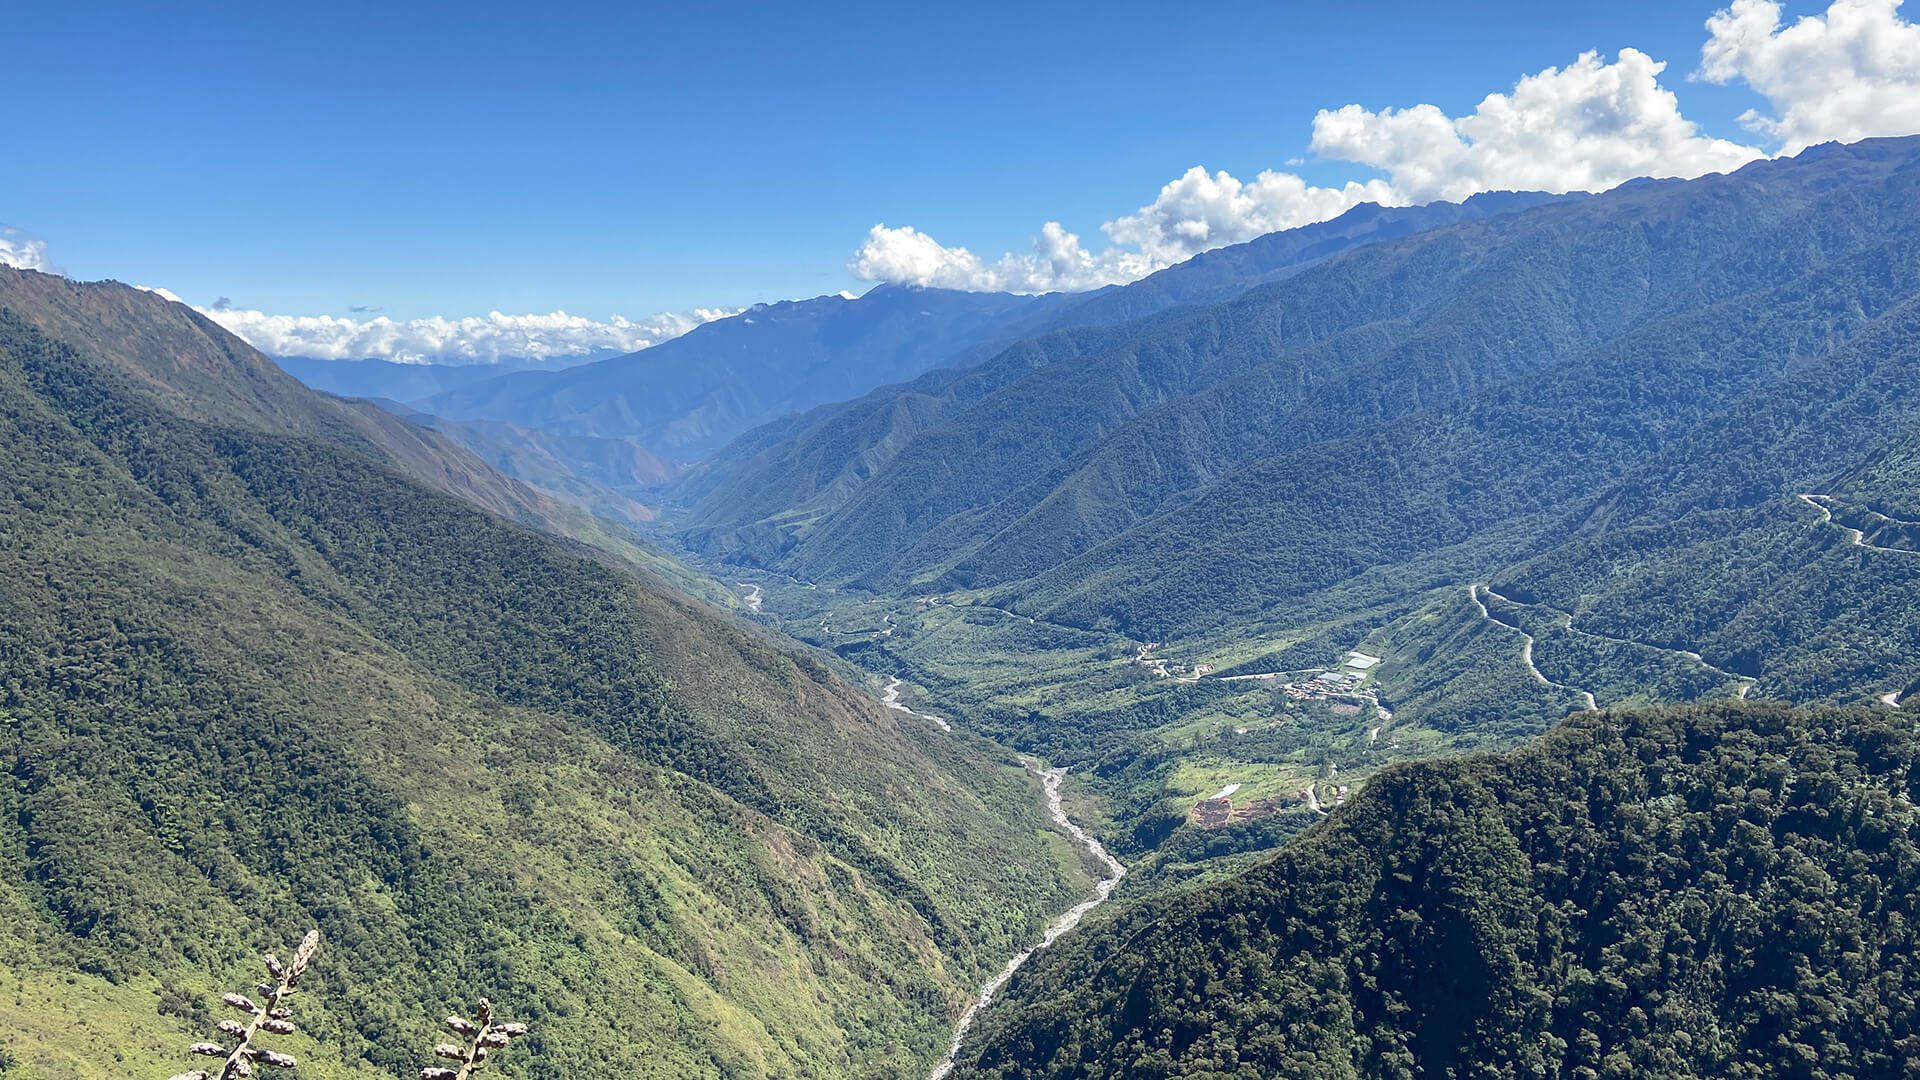 The view of the Huayopata valley after leaving behind the Abra Málaga mountain pass (before getting to the Coffee Route) - RESPONSible Travel Peru